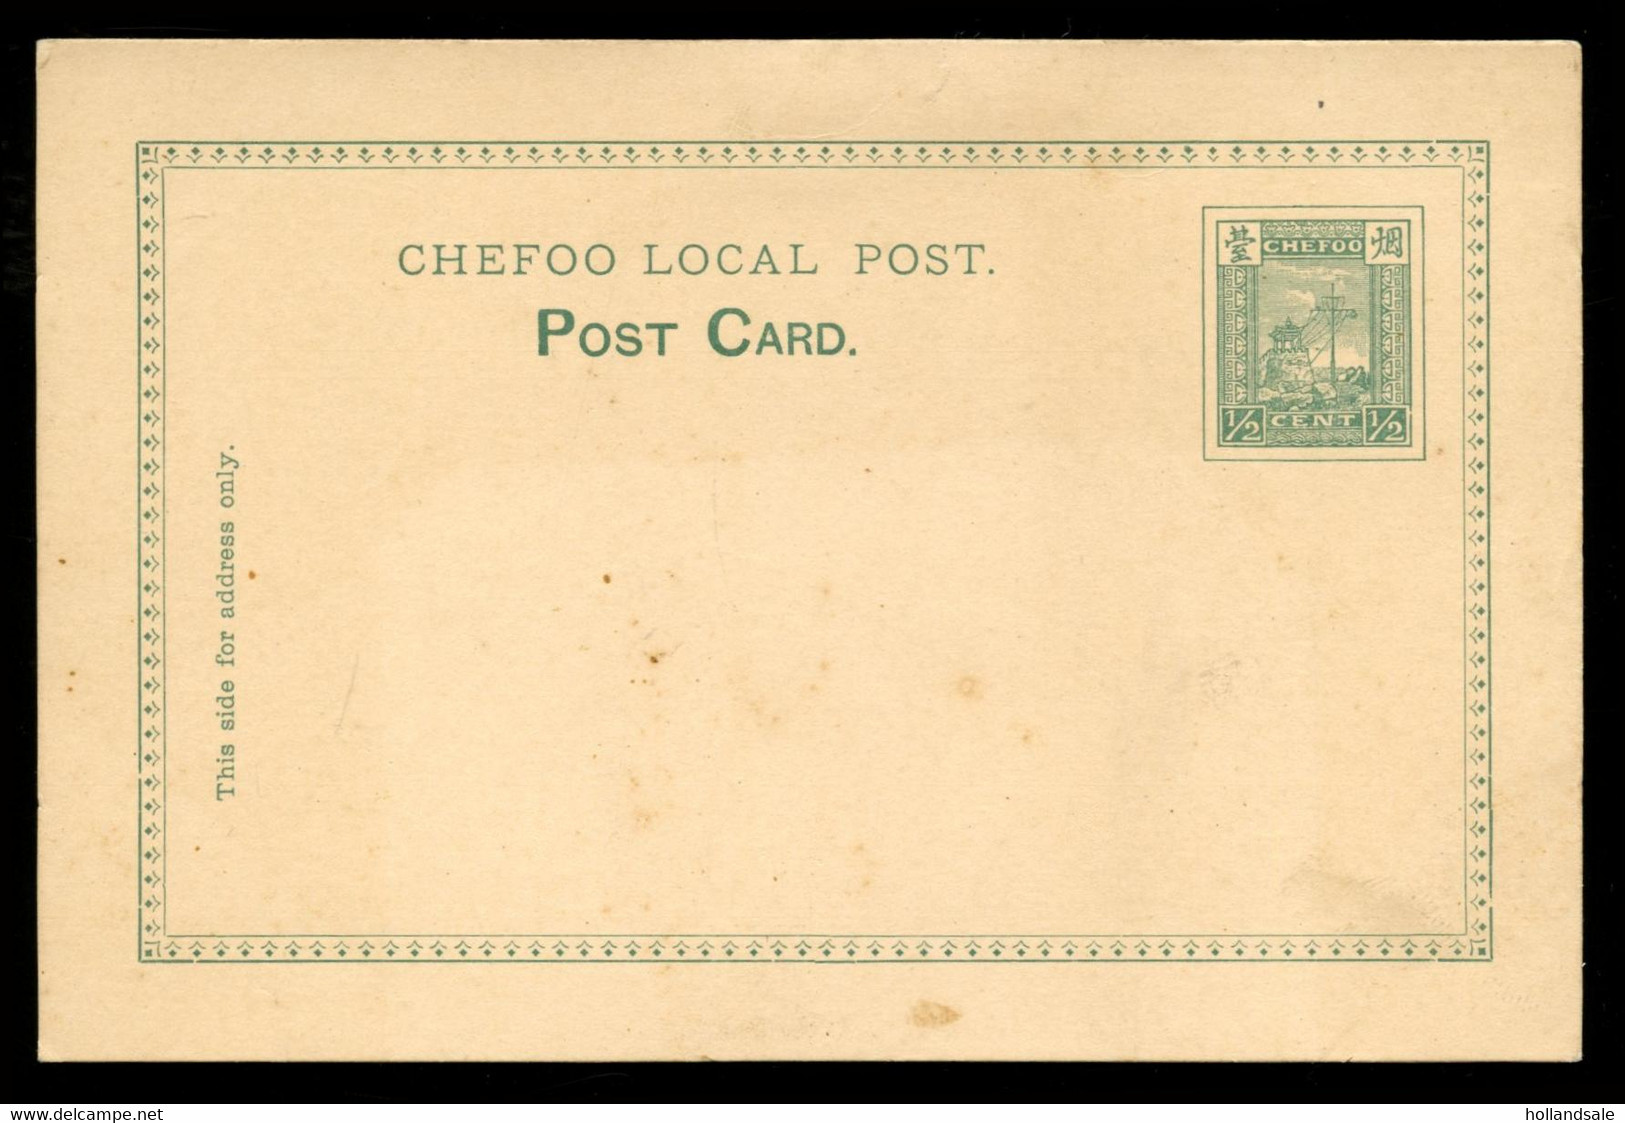 CHINA CHEFOO LOCAL POST - 1/2c Signal Tower POSTCARD. Type I. Unused. Tape Reminder On The Back. - Covers & Documents